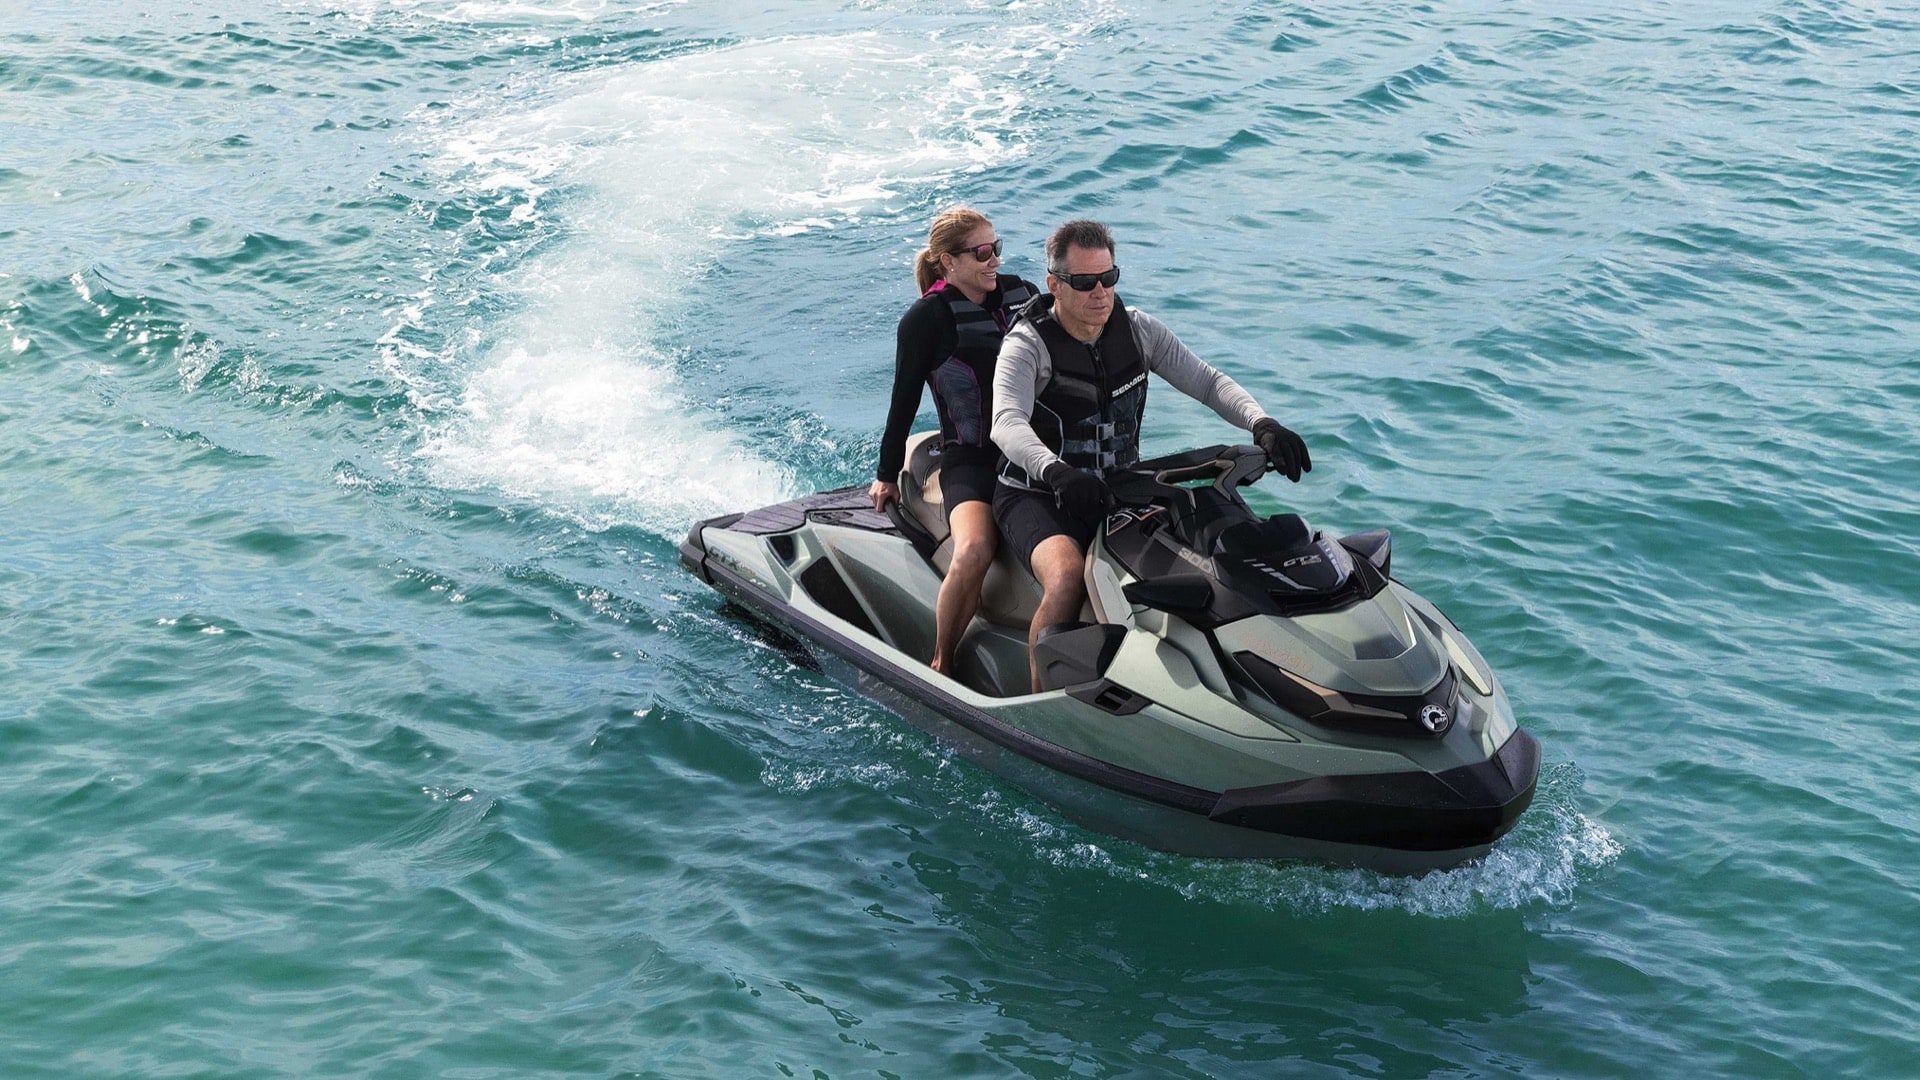 Sea-Doo jet skis, Jetboote variety, New or used, Boating excitement, 1920x1080 Full HD Desktop